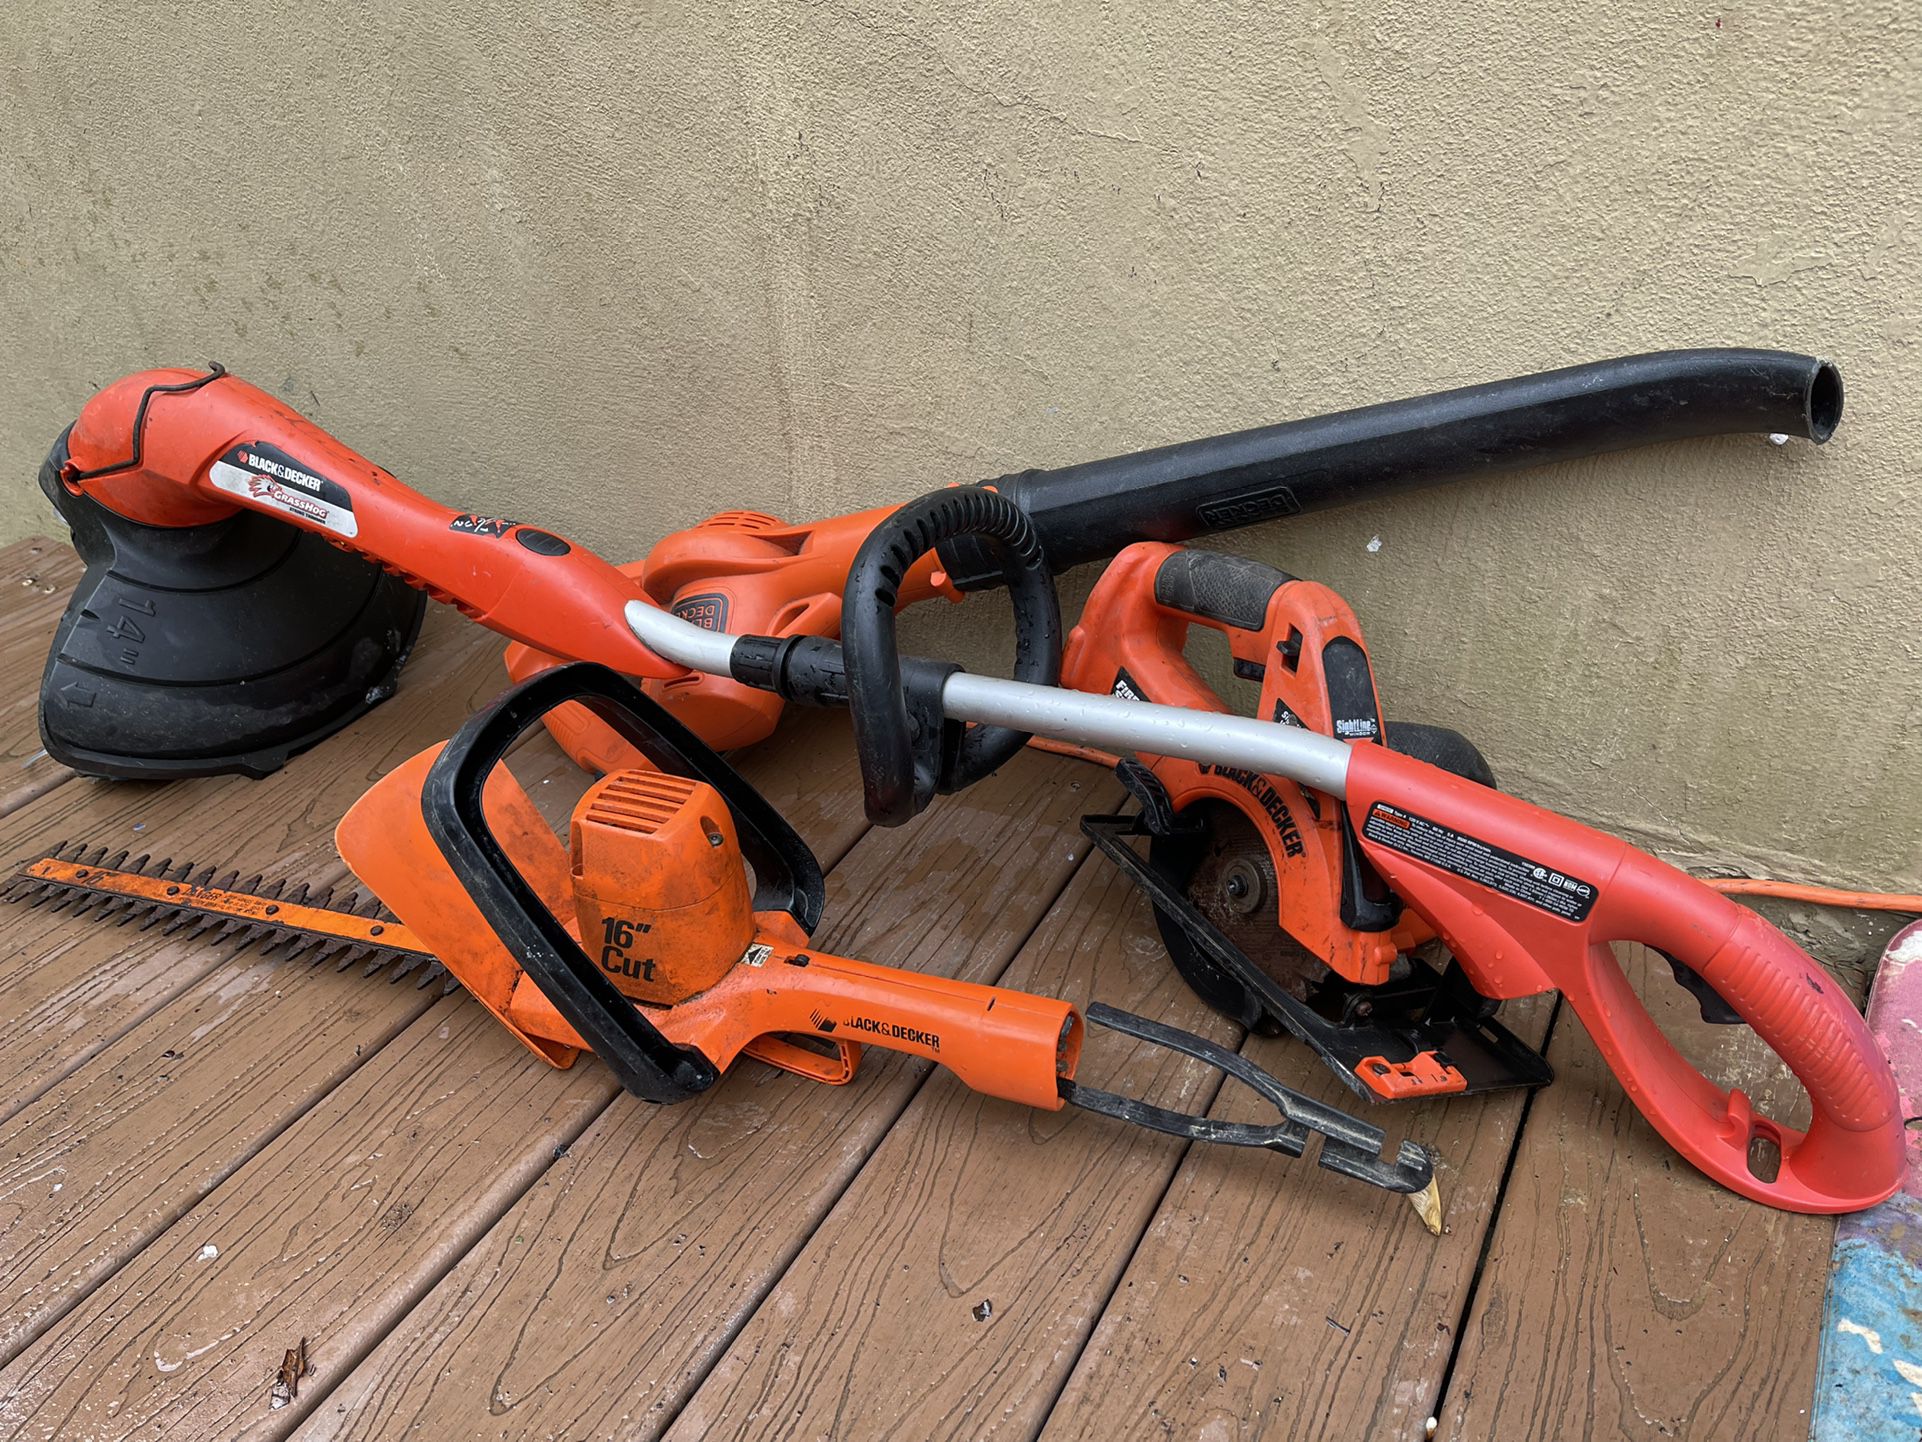 Black And Decker Hedger, Weed Eater, Table Saw,  Leaf Blower, No Chargers For Cordless $50 For All 